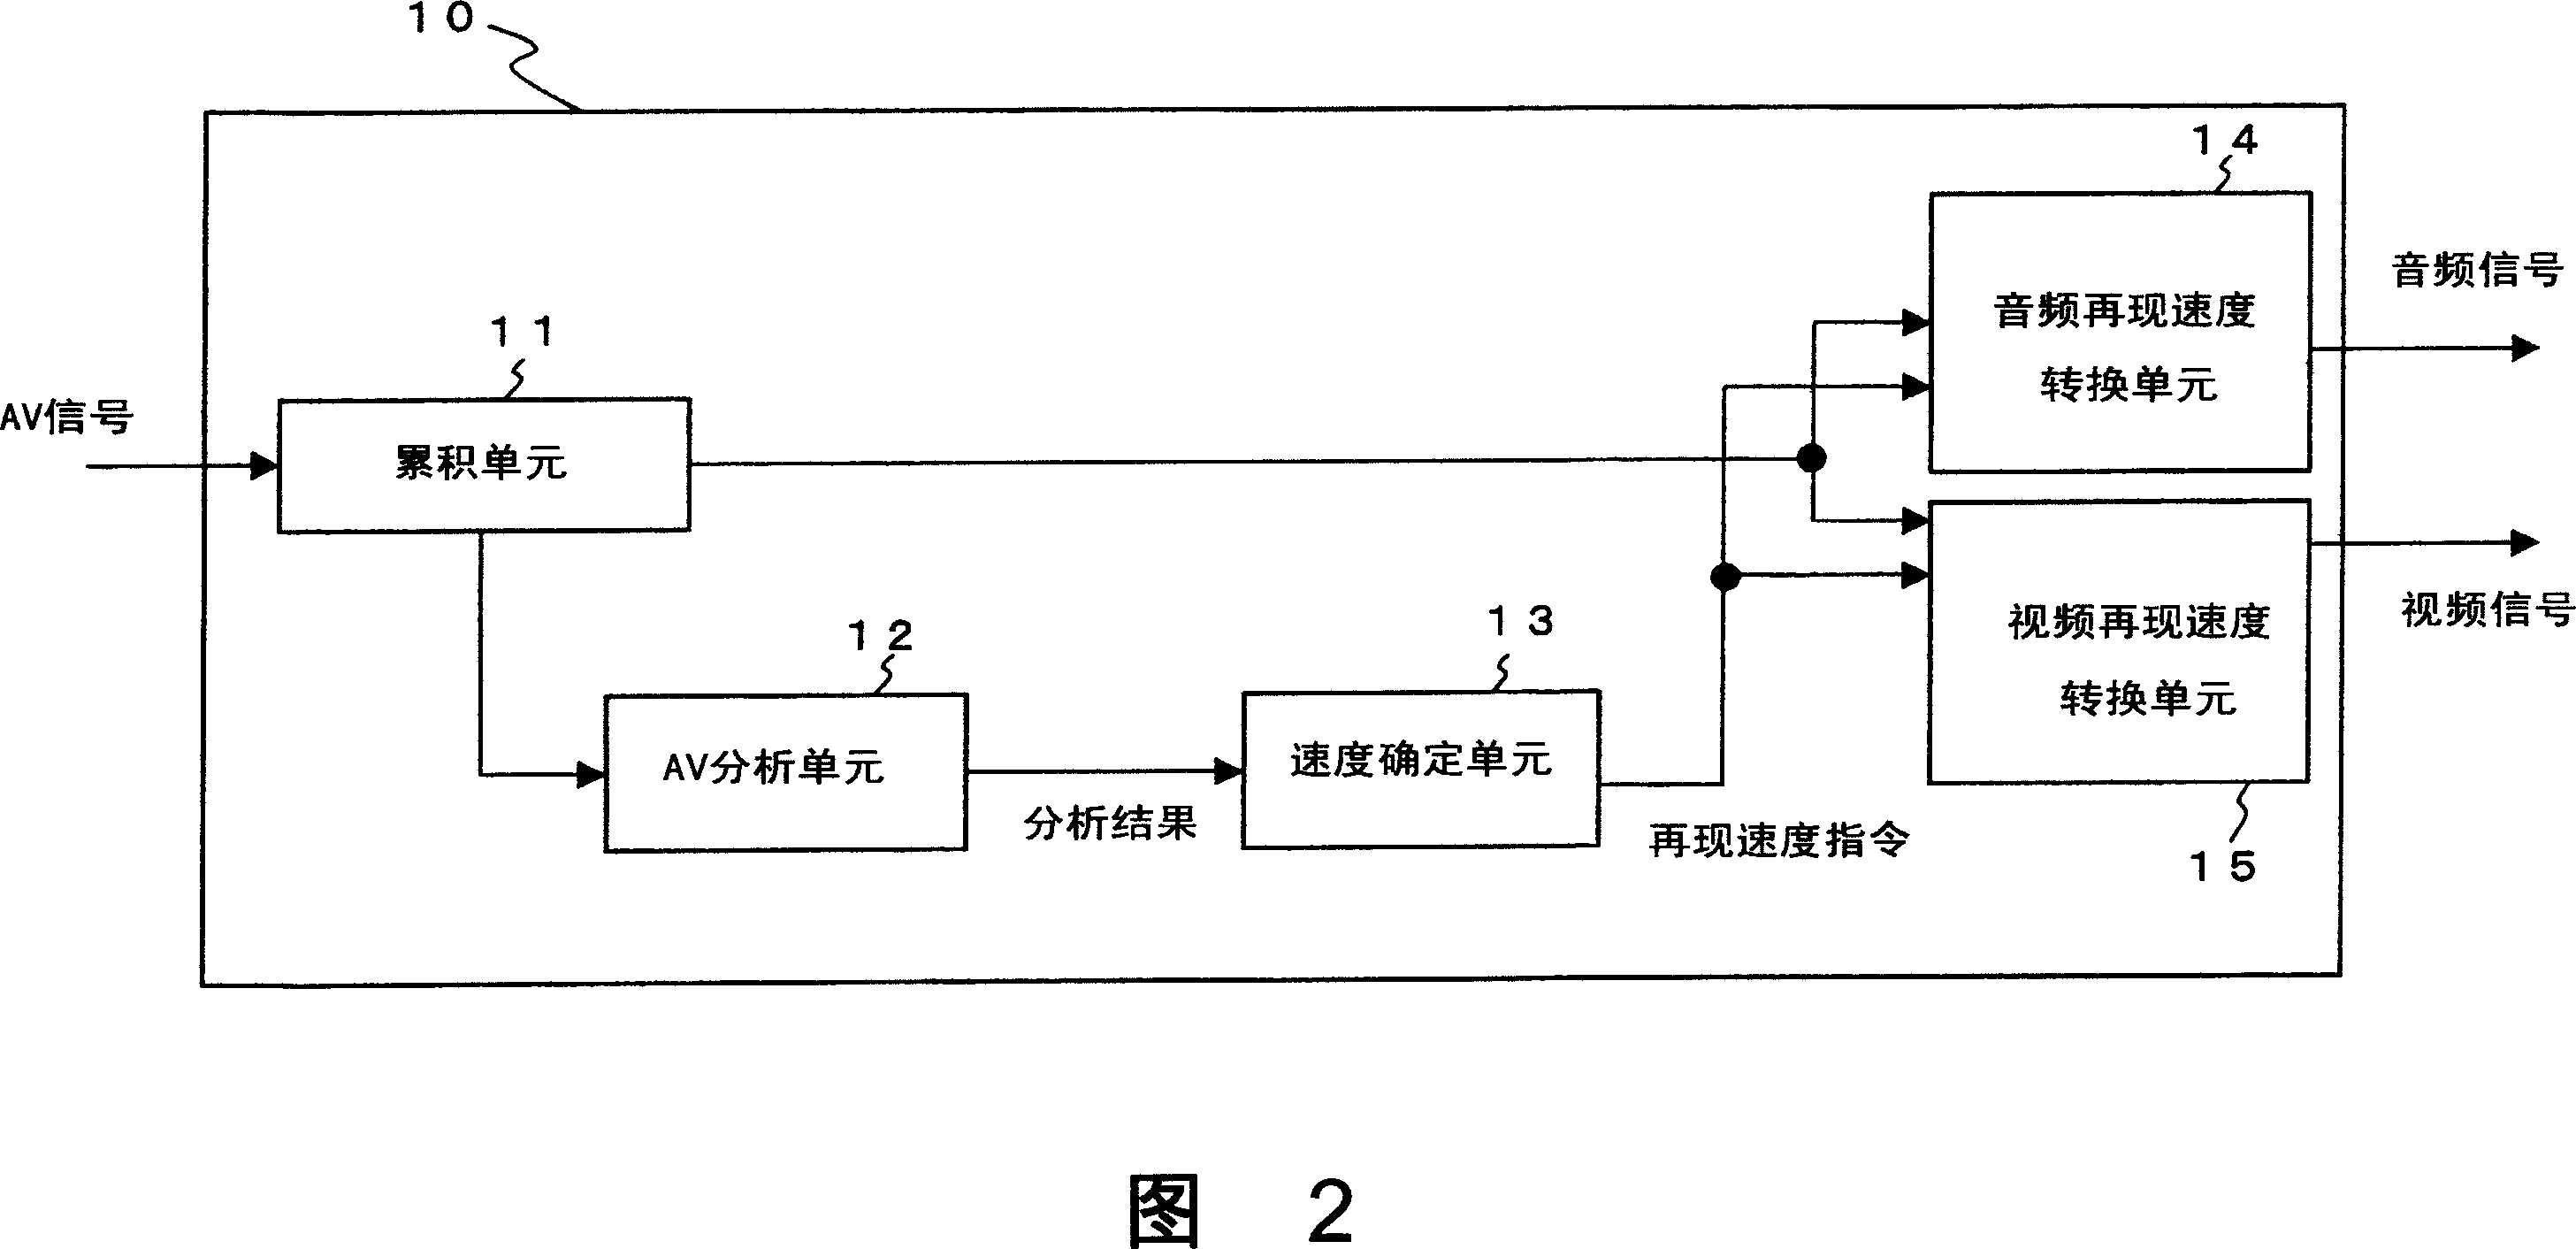 Recording/reproduction device, recording/reproduction method, recording medium containing a recording/reproduction program, and integrated circuit used in the recording/reproduction device